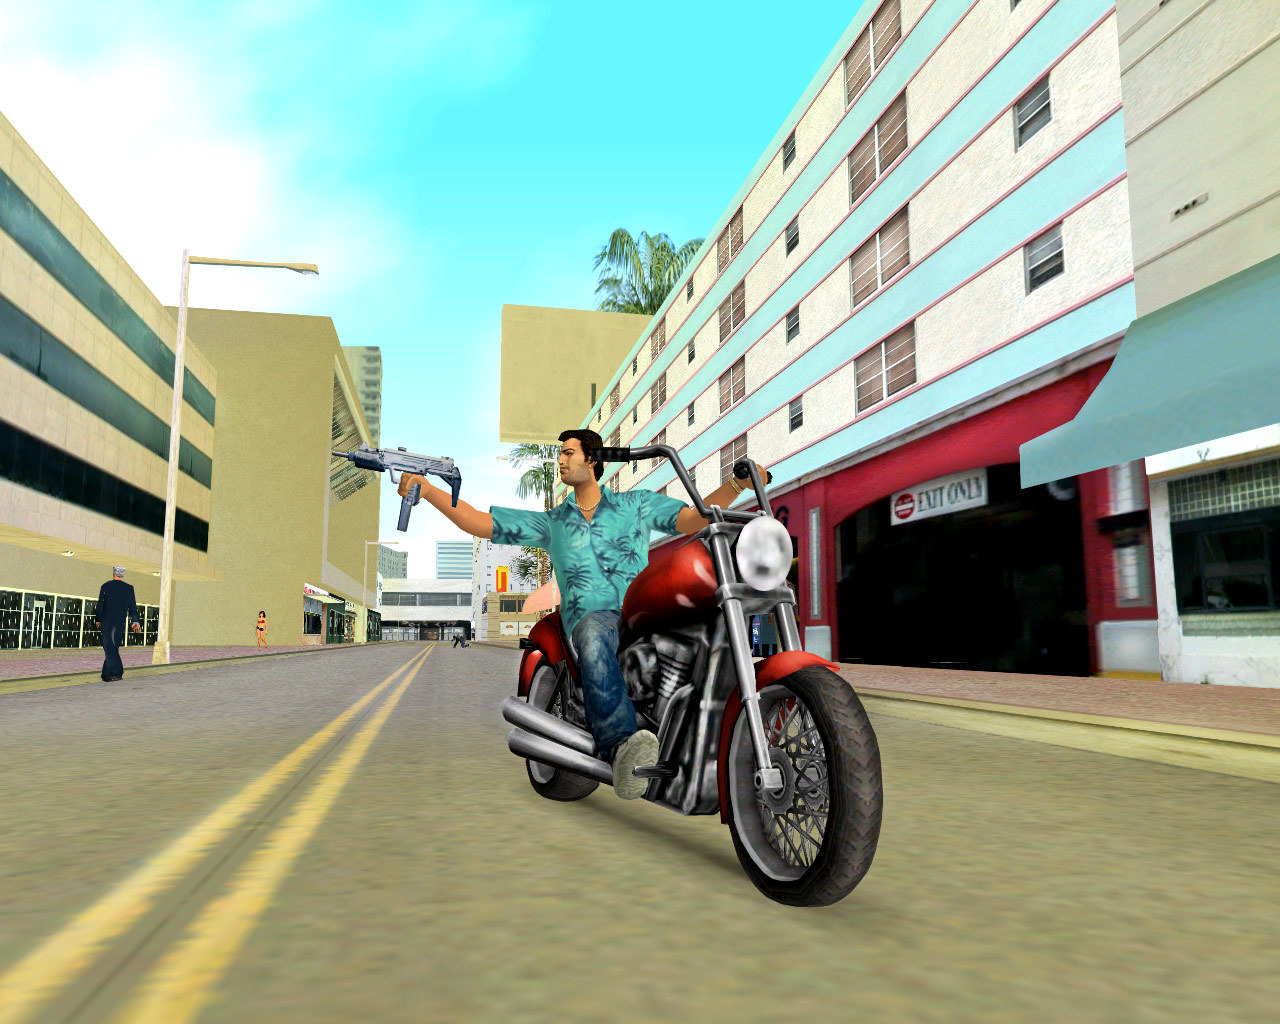 gta vice city 5 game free download full version for pc windows 7